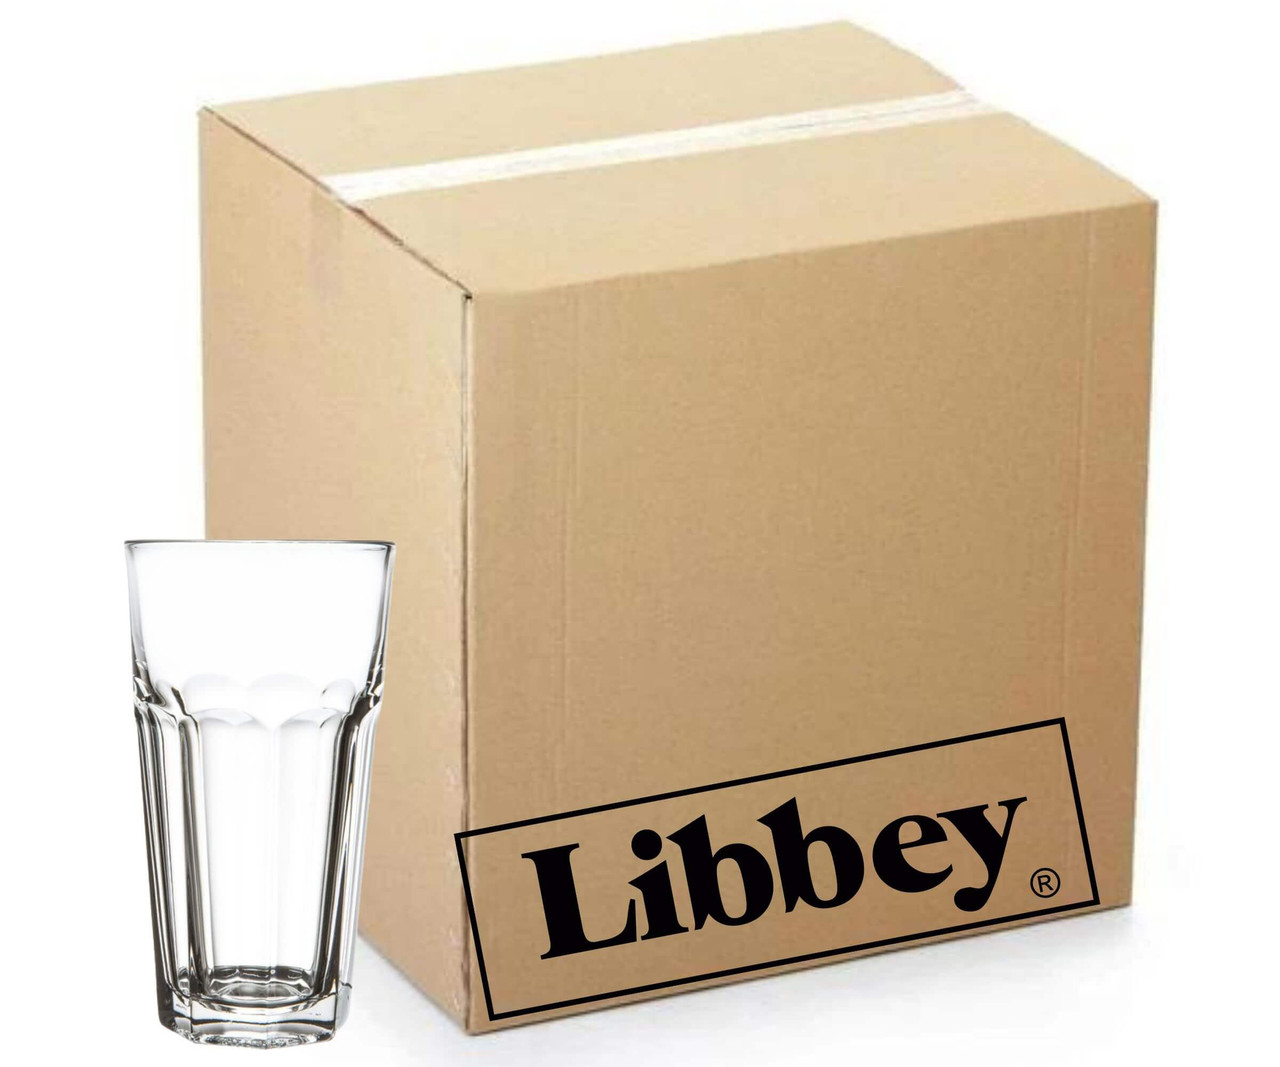 Libbey Gibraltar Case of 24 DuraTuff Treated 22 oz. Iced Tea Glasses-Chicken Pieces